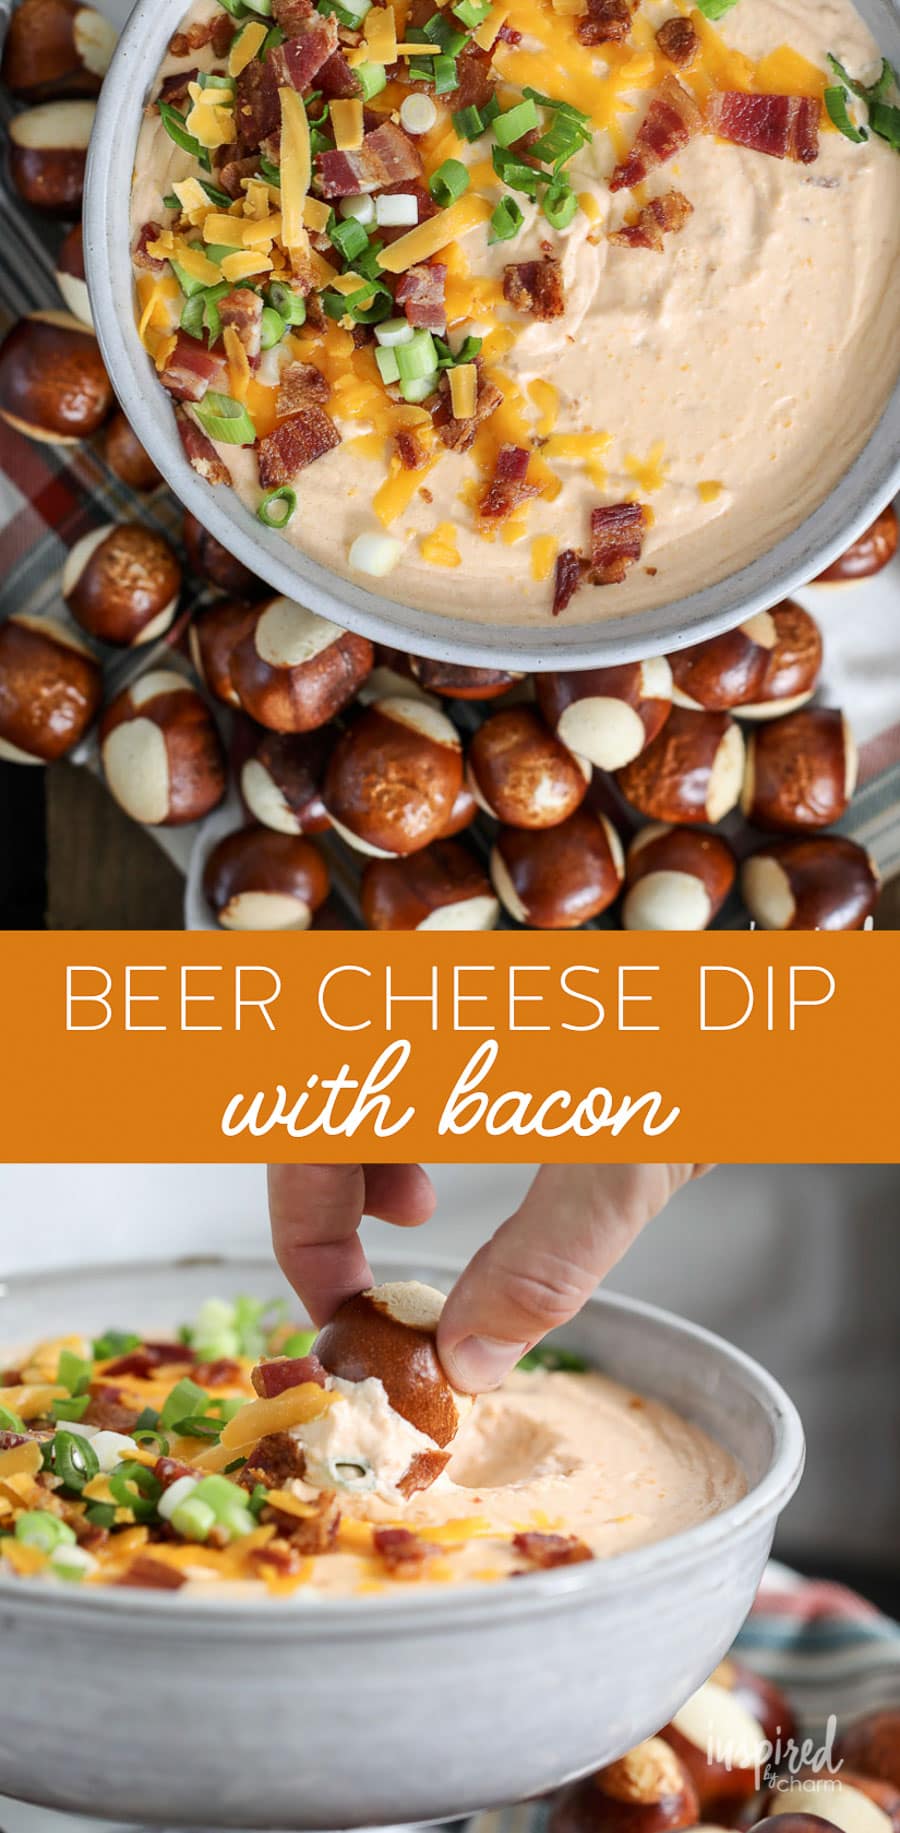 The BEST Beer Cheese Dip with Bacon fall appetizer recipe! #cheesedip #appetizer #beer #dip #bacon #gameday #football